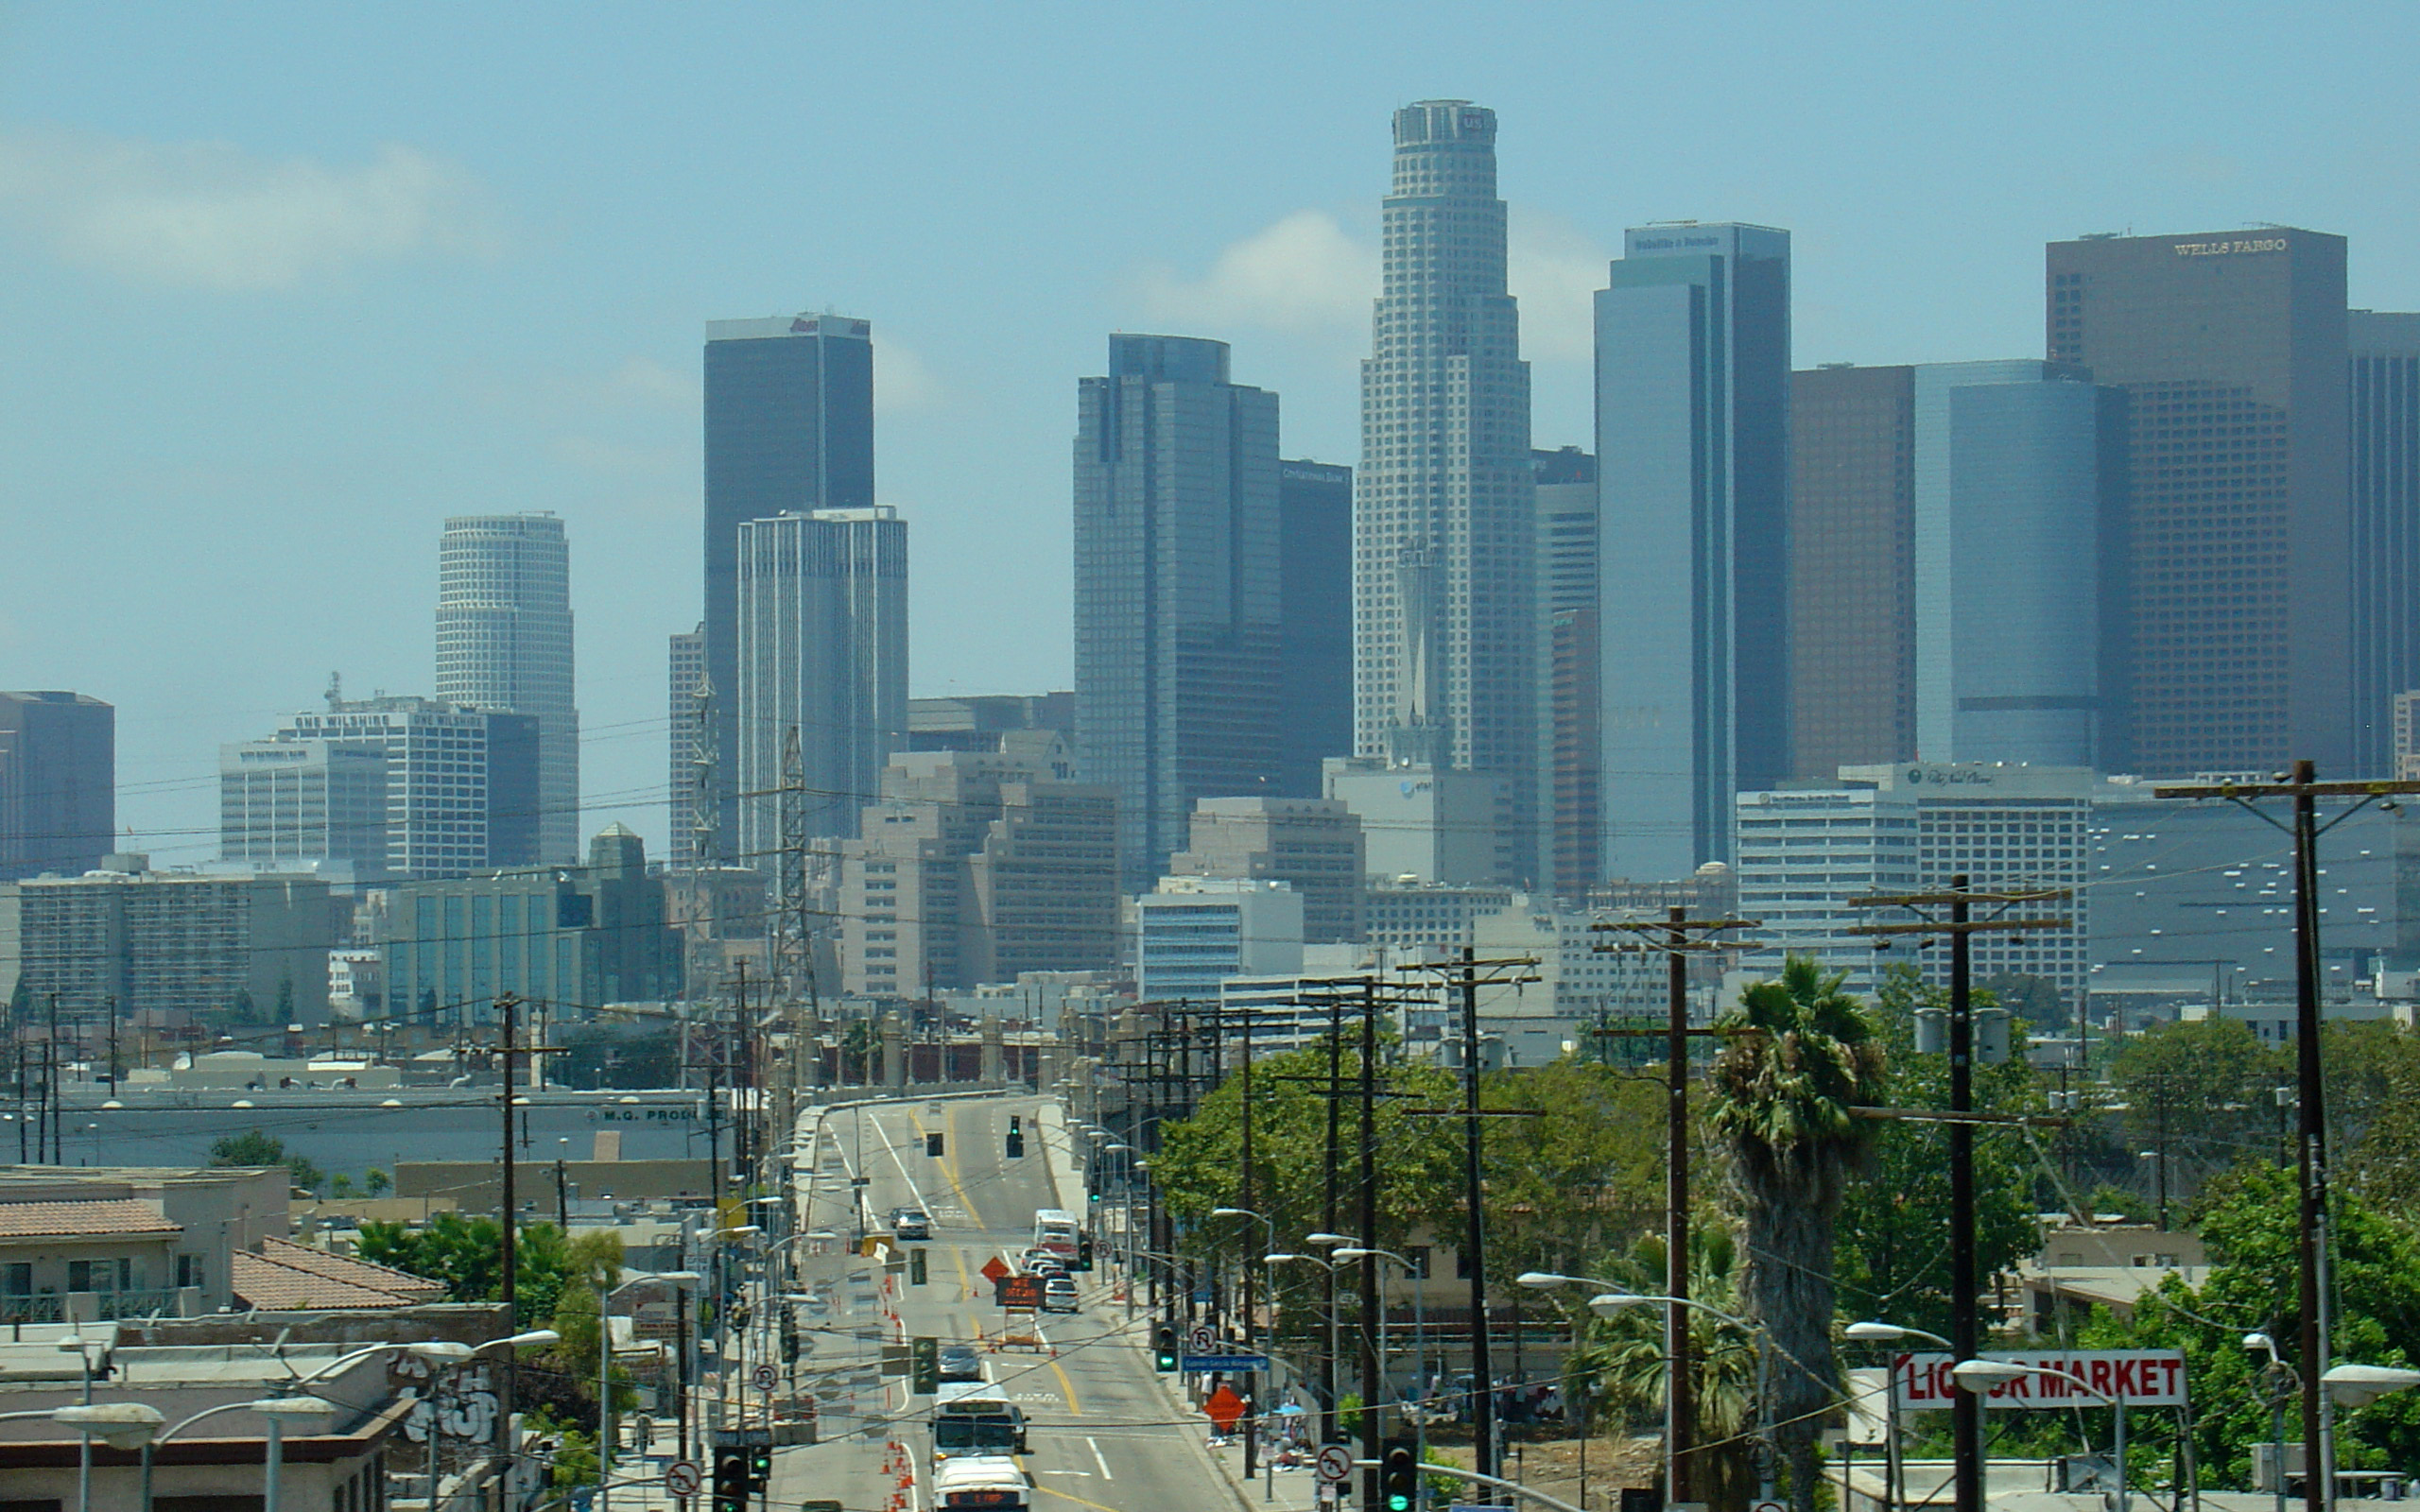 I do think the LA skyline is underrated. It's probably third in sheer size behind Chicago and NYC.